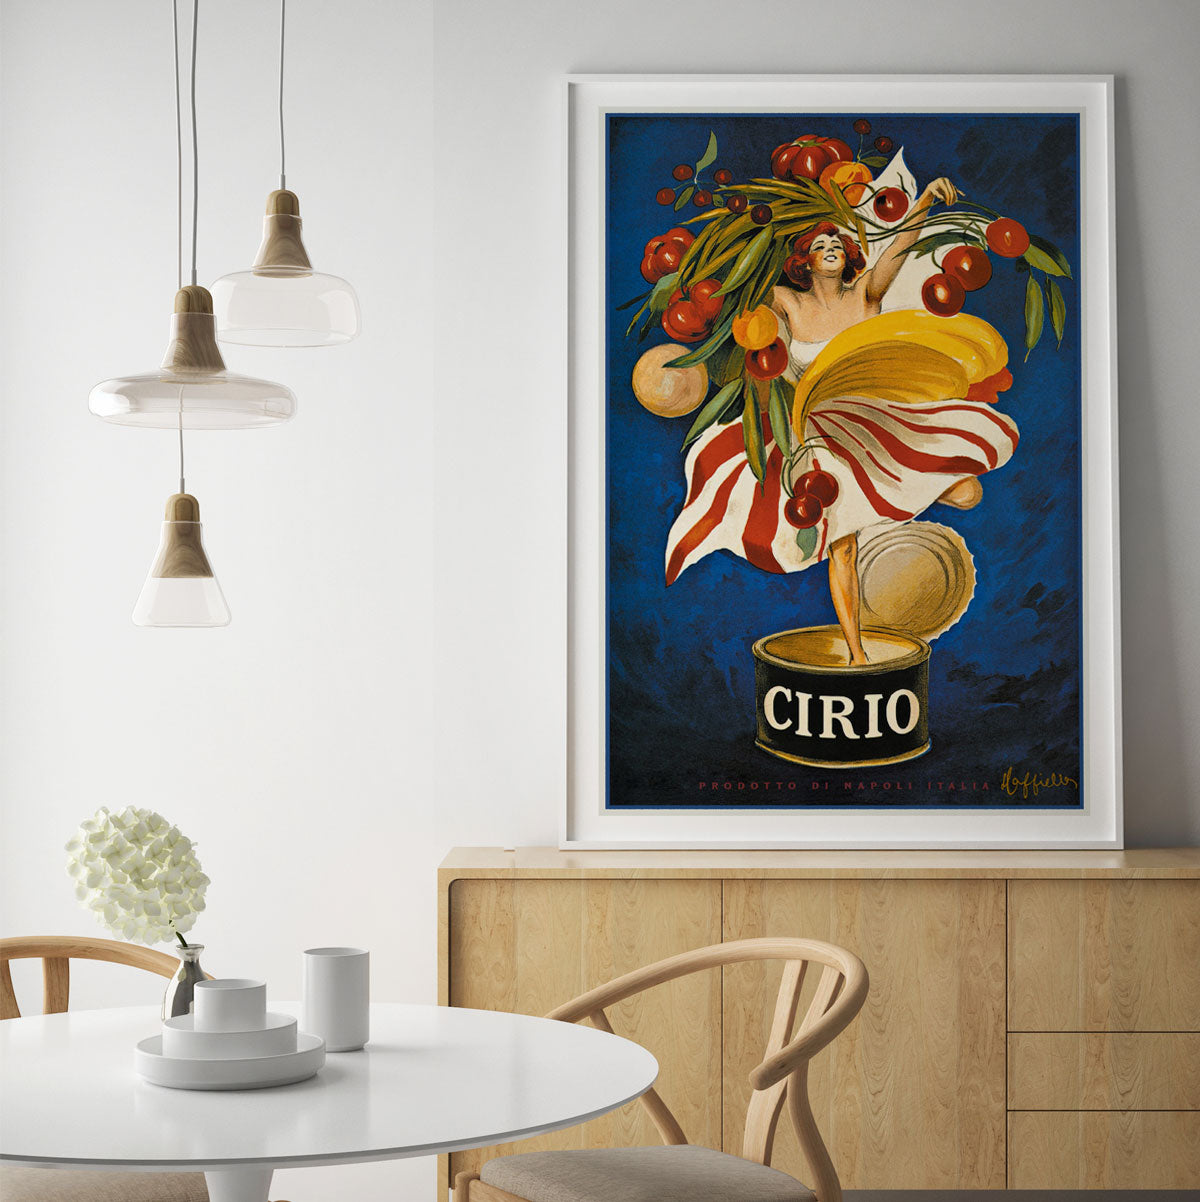 Cirio Italy retro vintage poster from Places We Luv